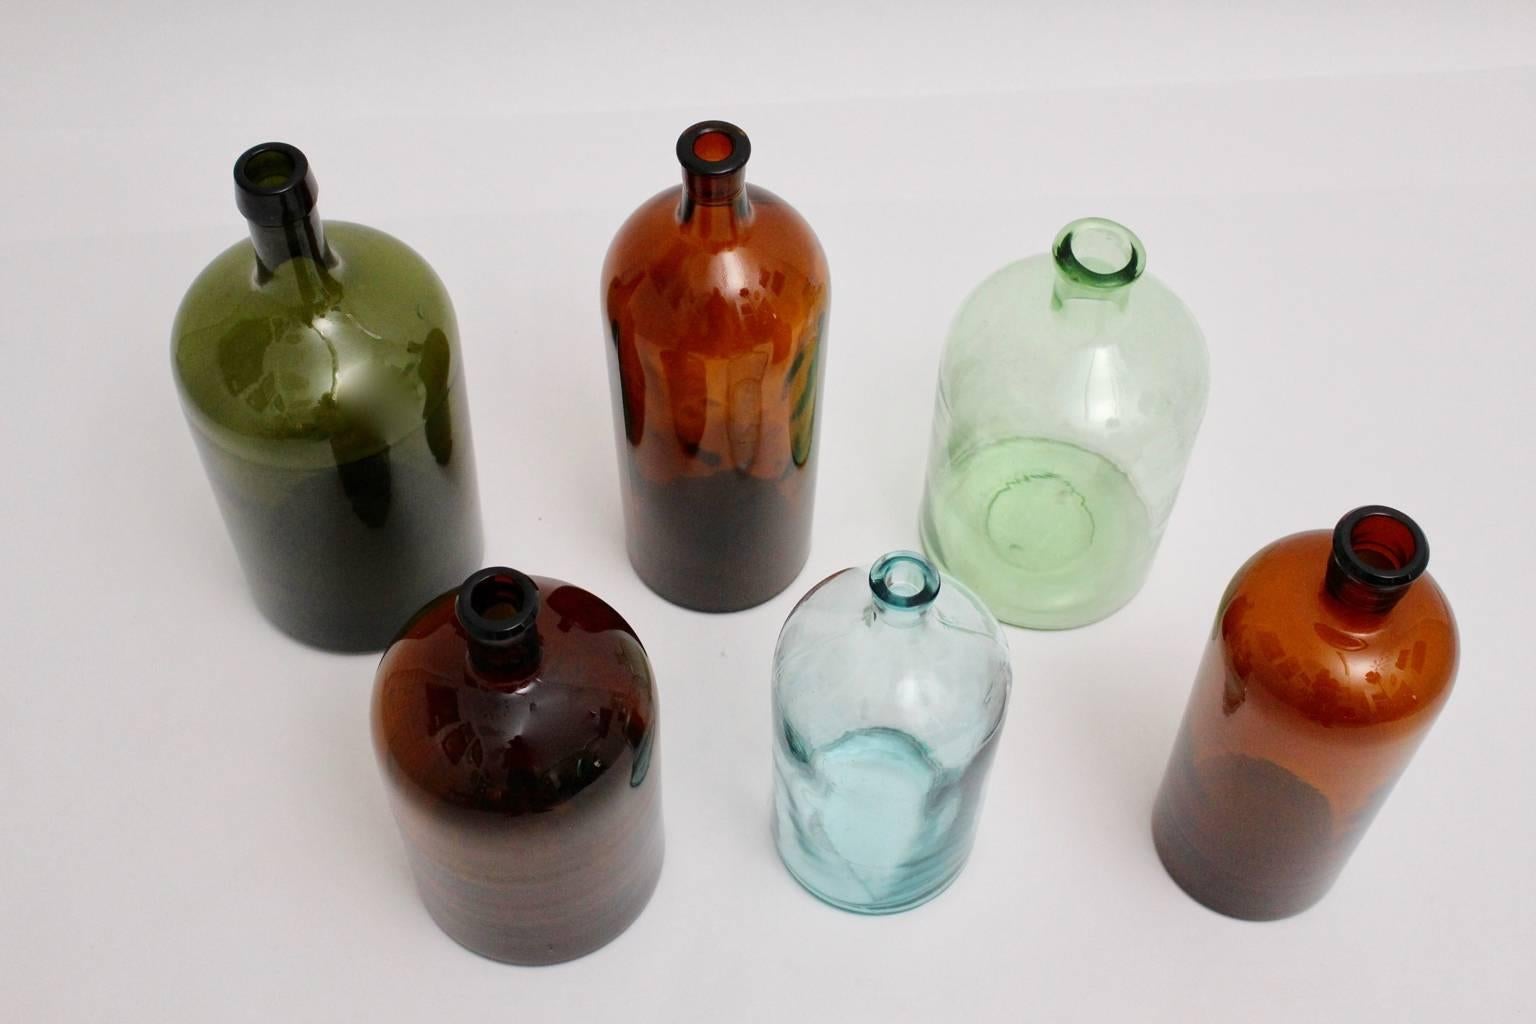 Set of six handblown wine bottles in the color green, brown and colorless with various measures from 2 liters to 5 liters.
Diameter from 12.8 cm to 16 cm
Height from 29 cm to 38 cm
The bottles are carefully cleaned and in best condition.
all